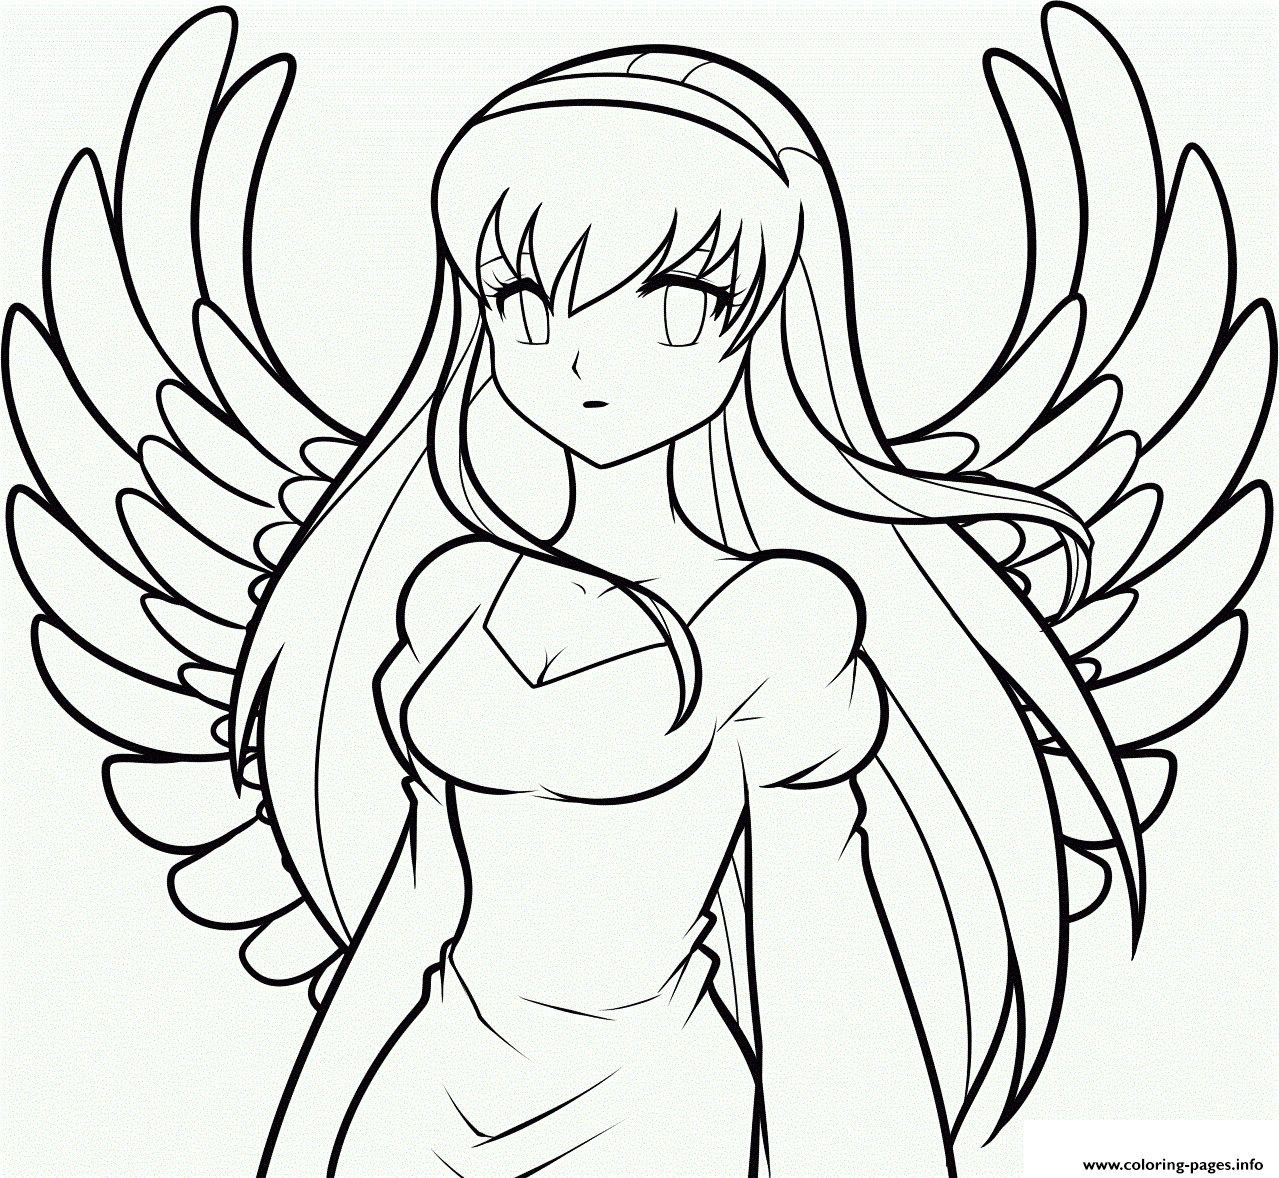 Easy Anime Coloring Pages For Kids
 Easy Drawings To Draw Anime Angel Girl Coloring Pages